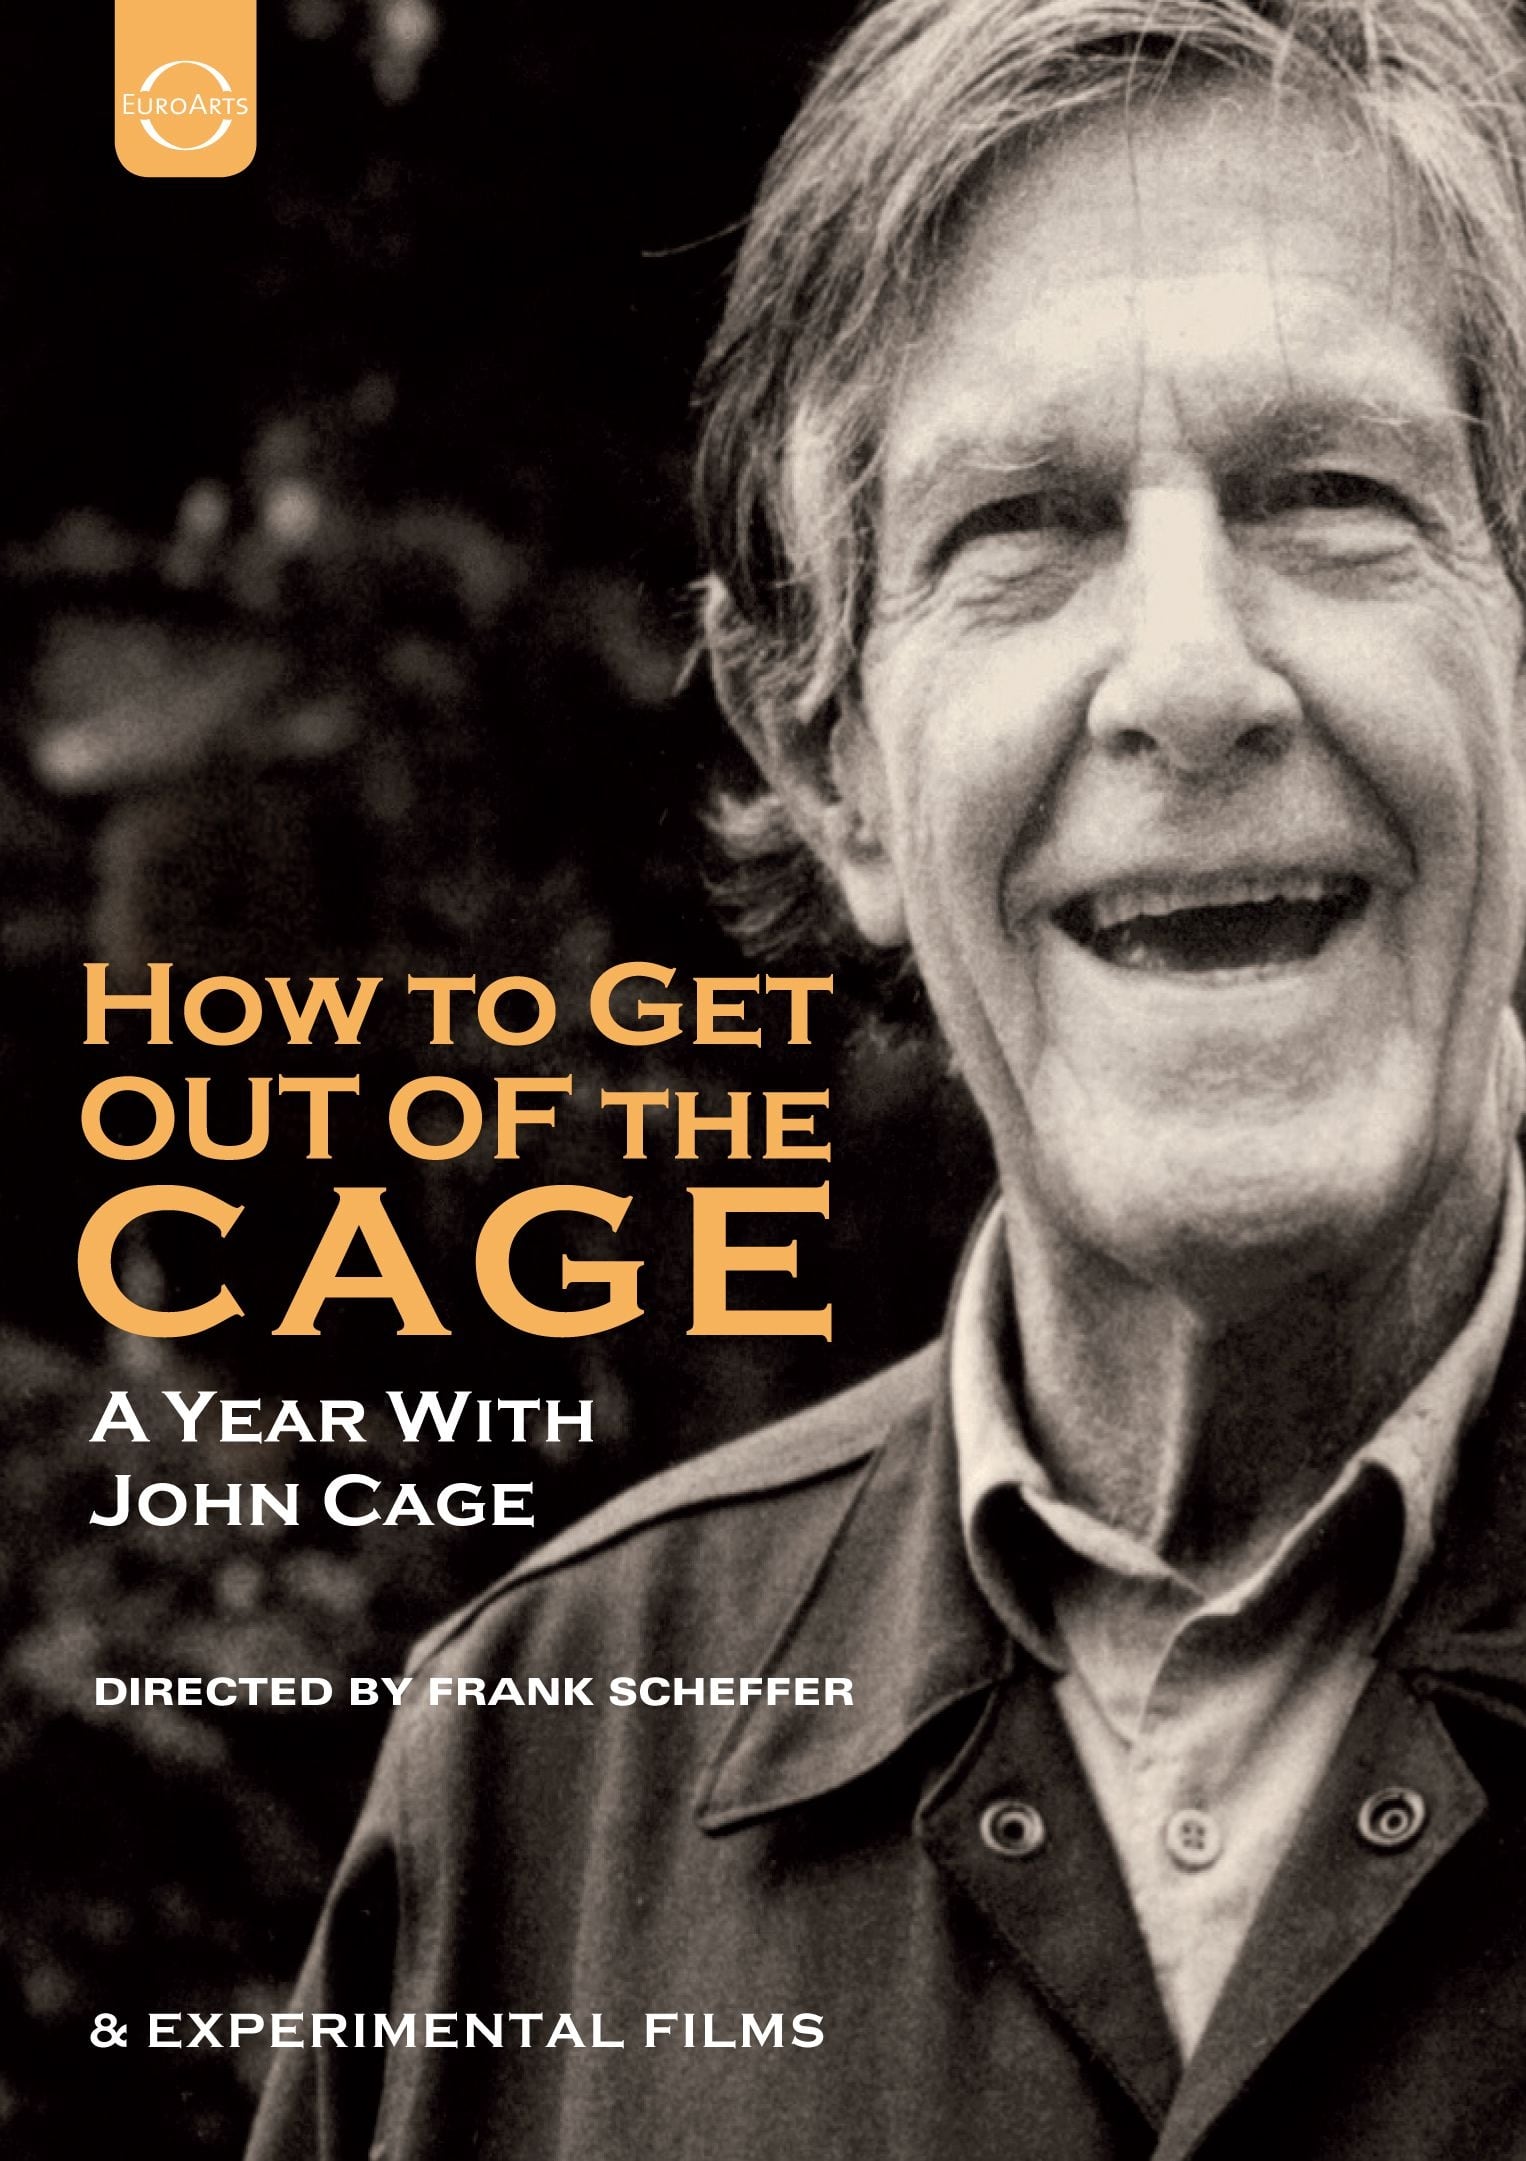 How to Get Out of the Cage (A year with John Cage) (2012)